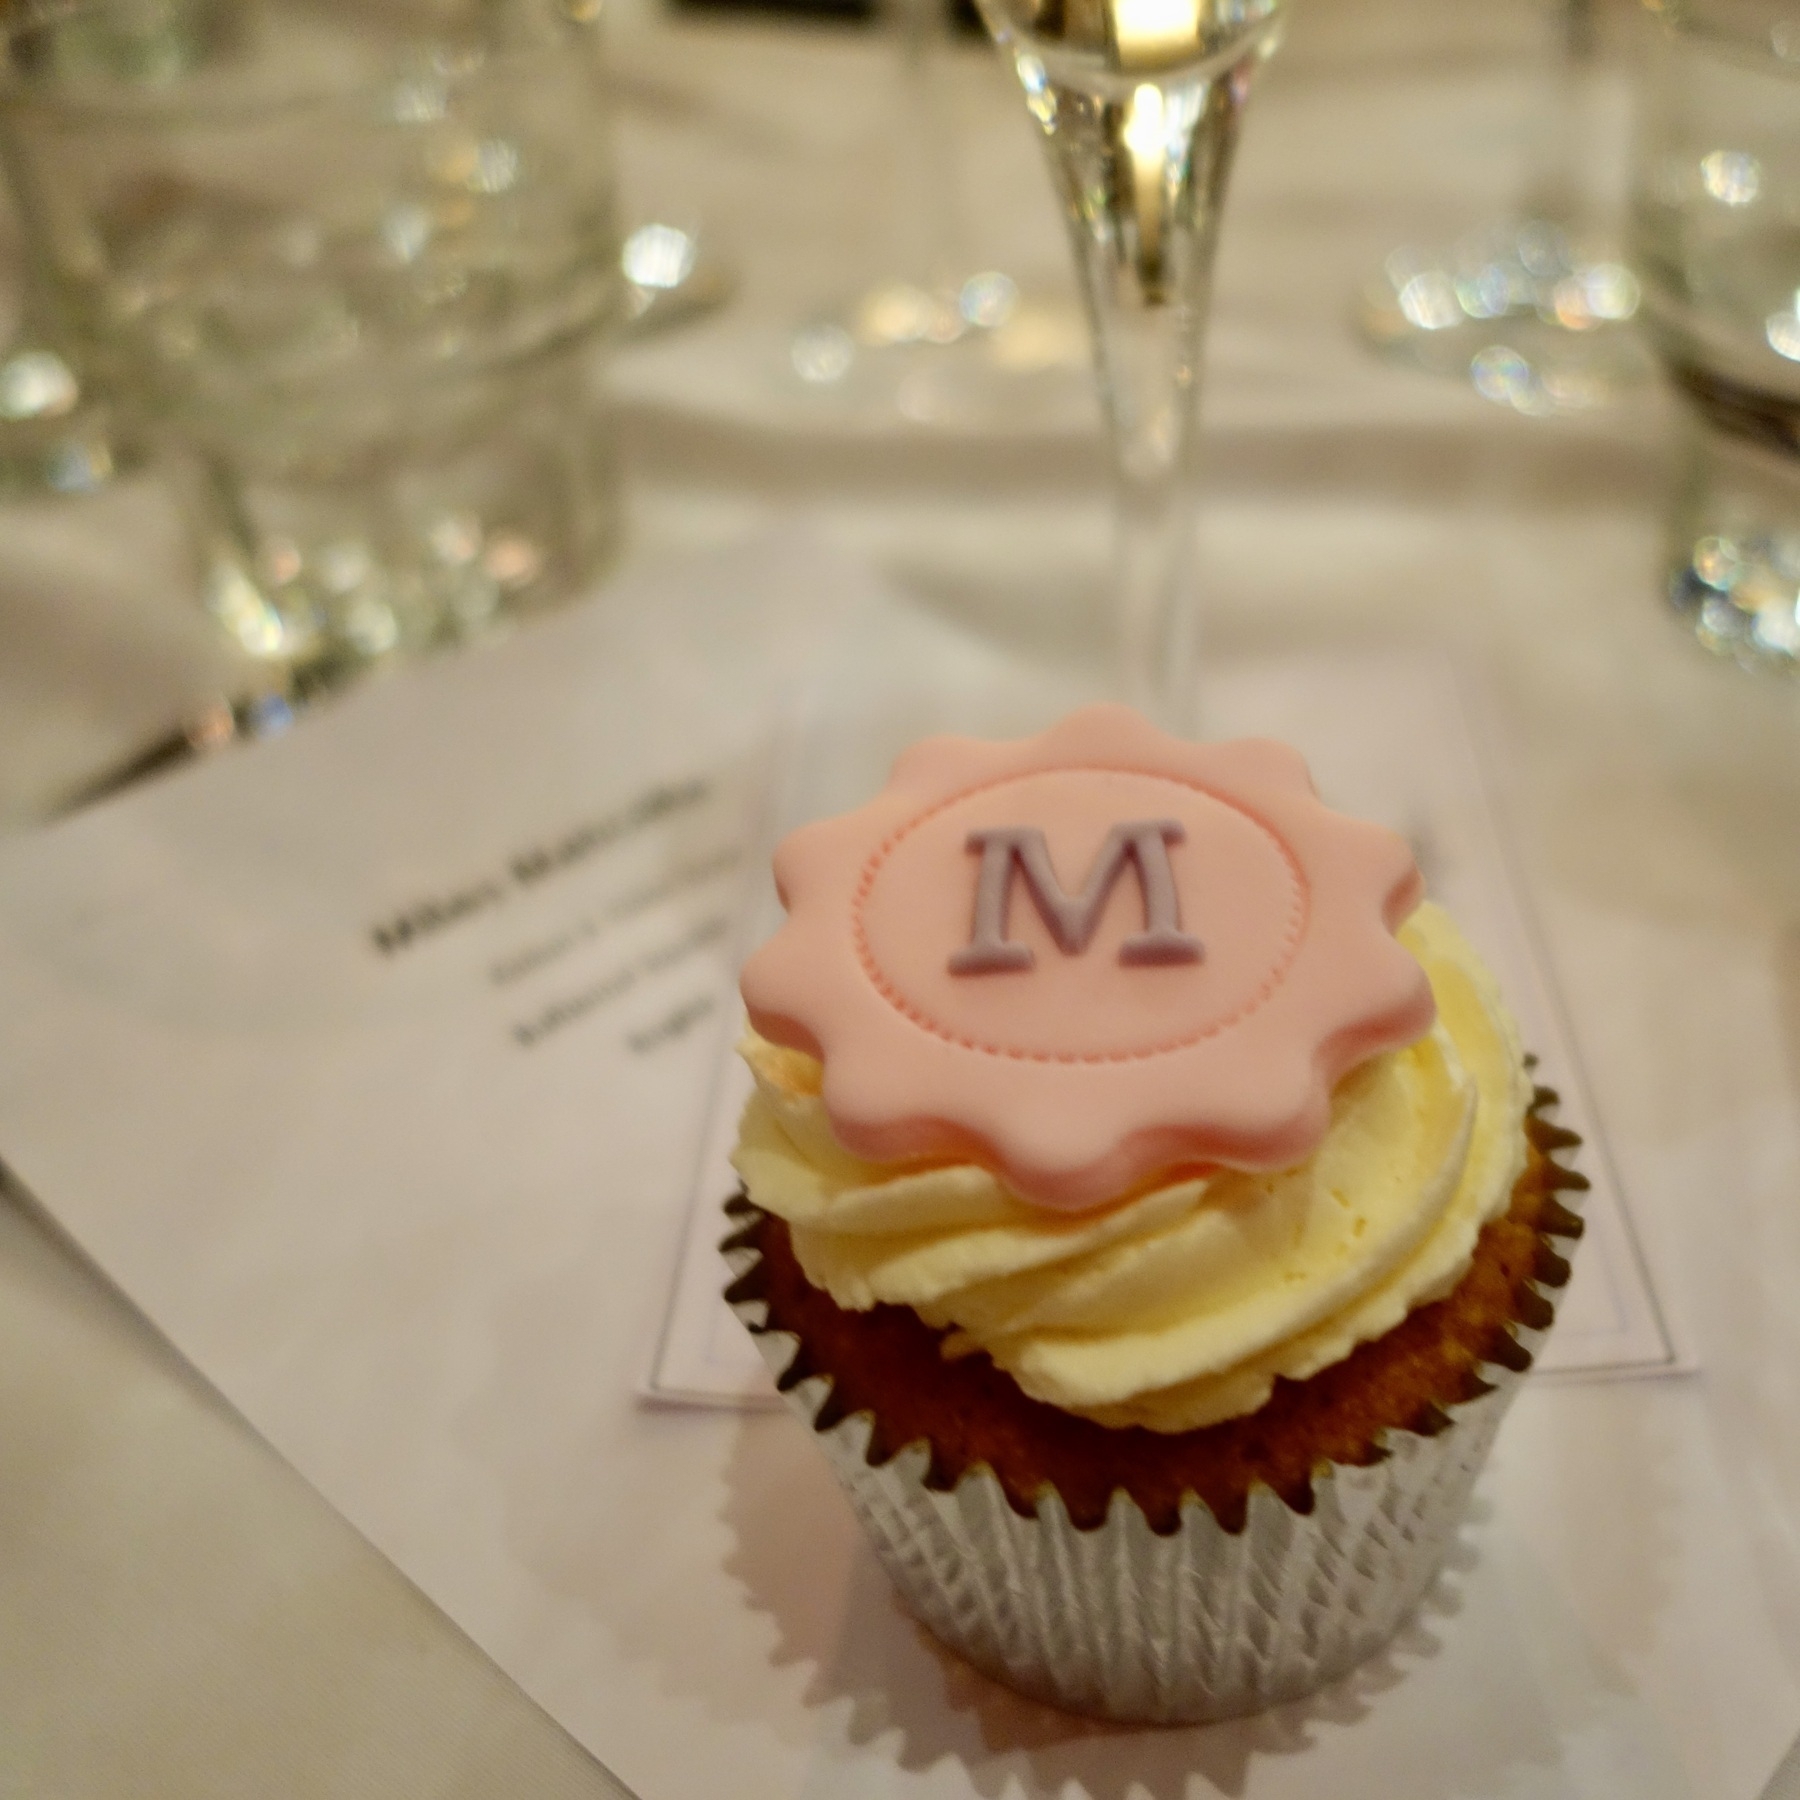 A cupcake with the initial M on top of a menu, surrounded by wine glasses, offered as a birthday favour